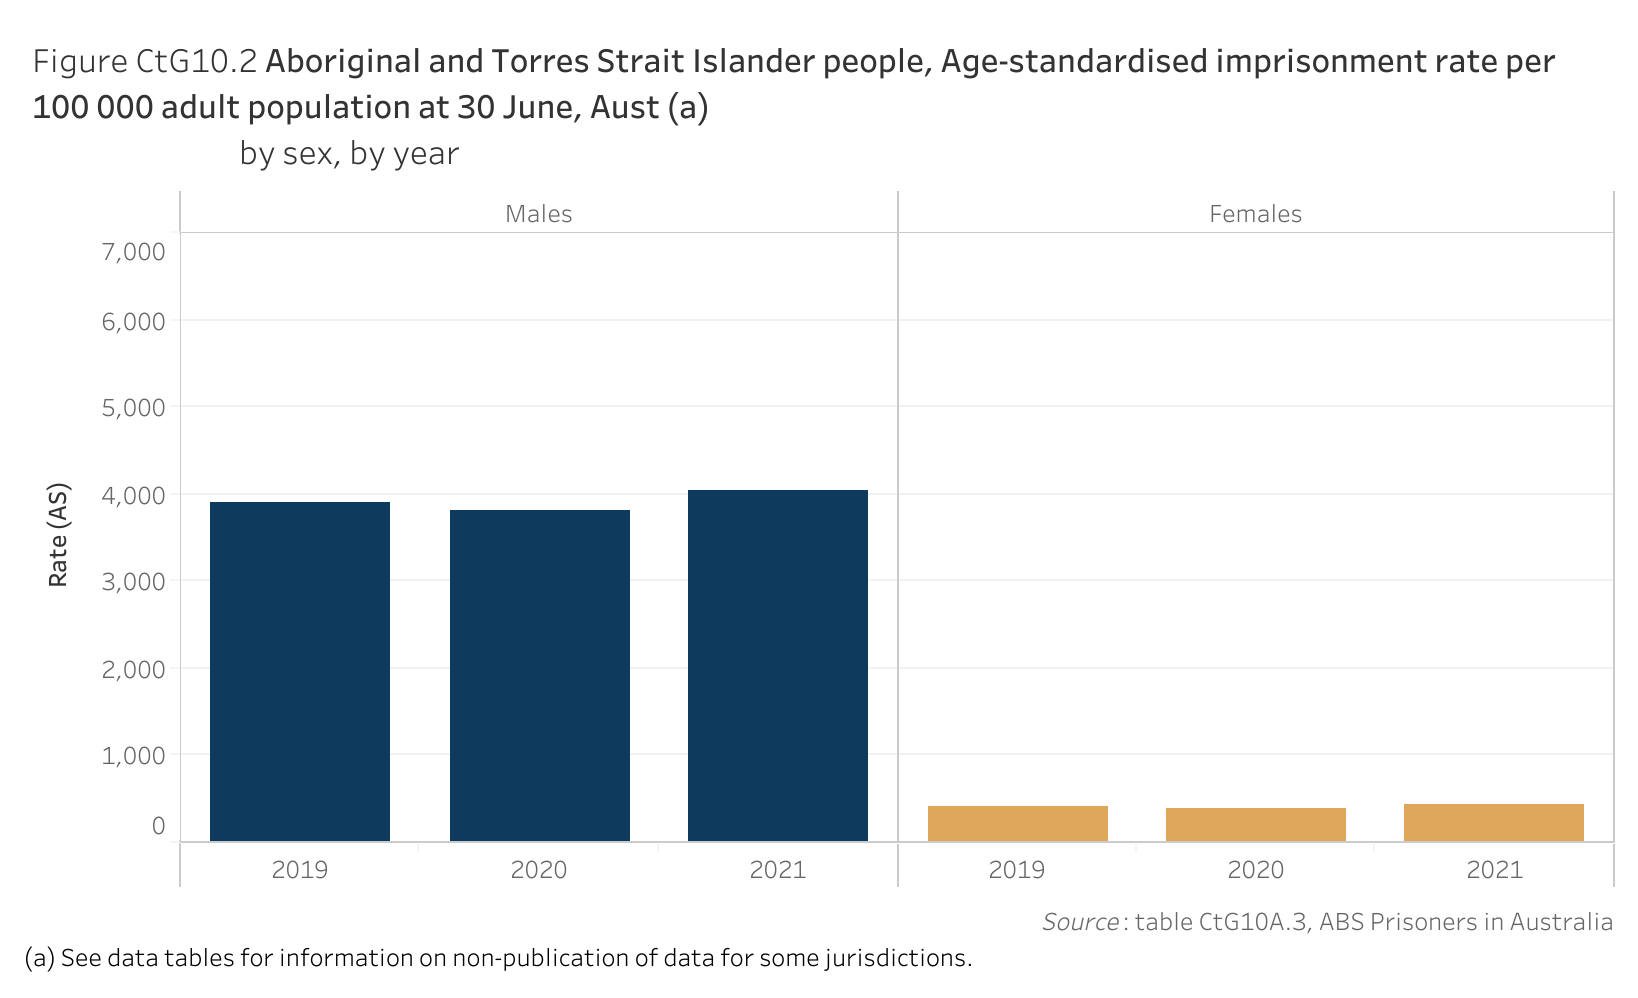 Figure CtG10.2. Bar chart showing the age-standardised imprisonment rate of Aboriginal and Torres Strait Islander people per 100 000 adult population at 30 June in Australia, by sex and by year. Data table of figure CtG10.2 is below.